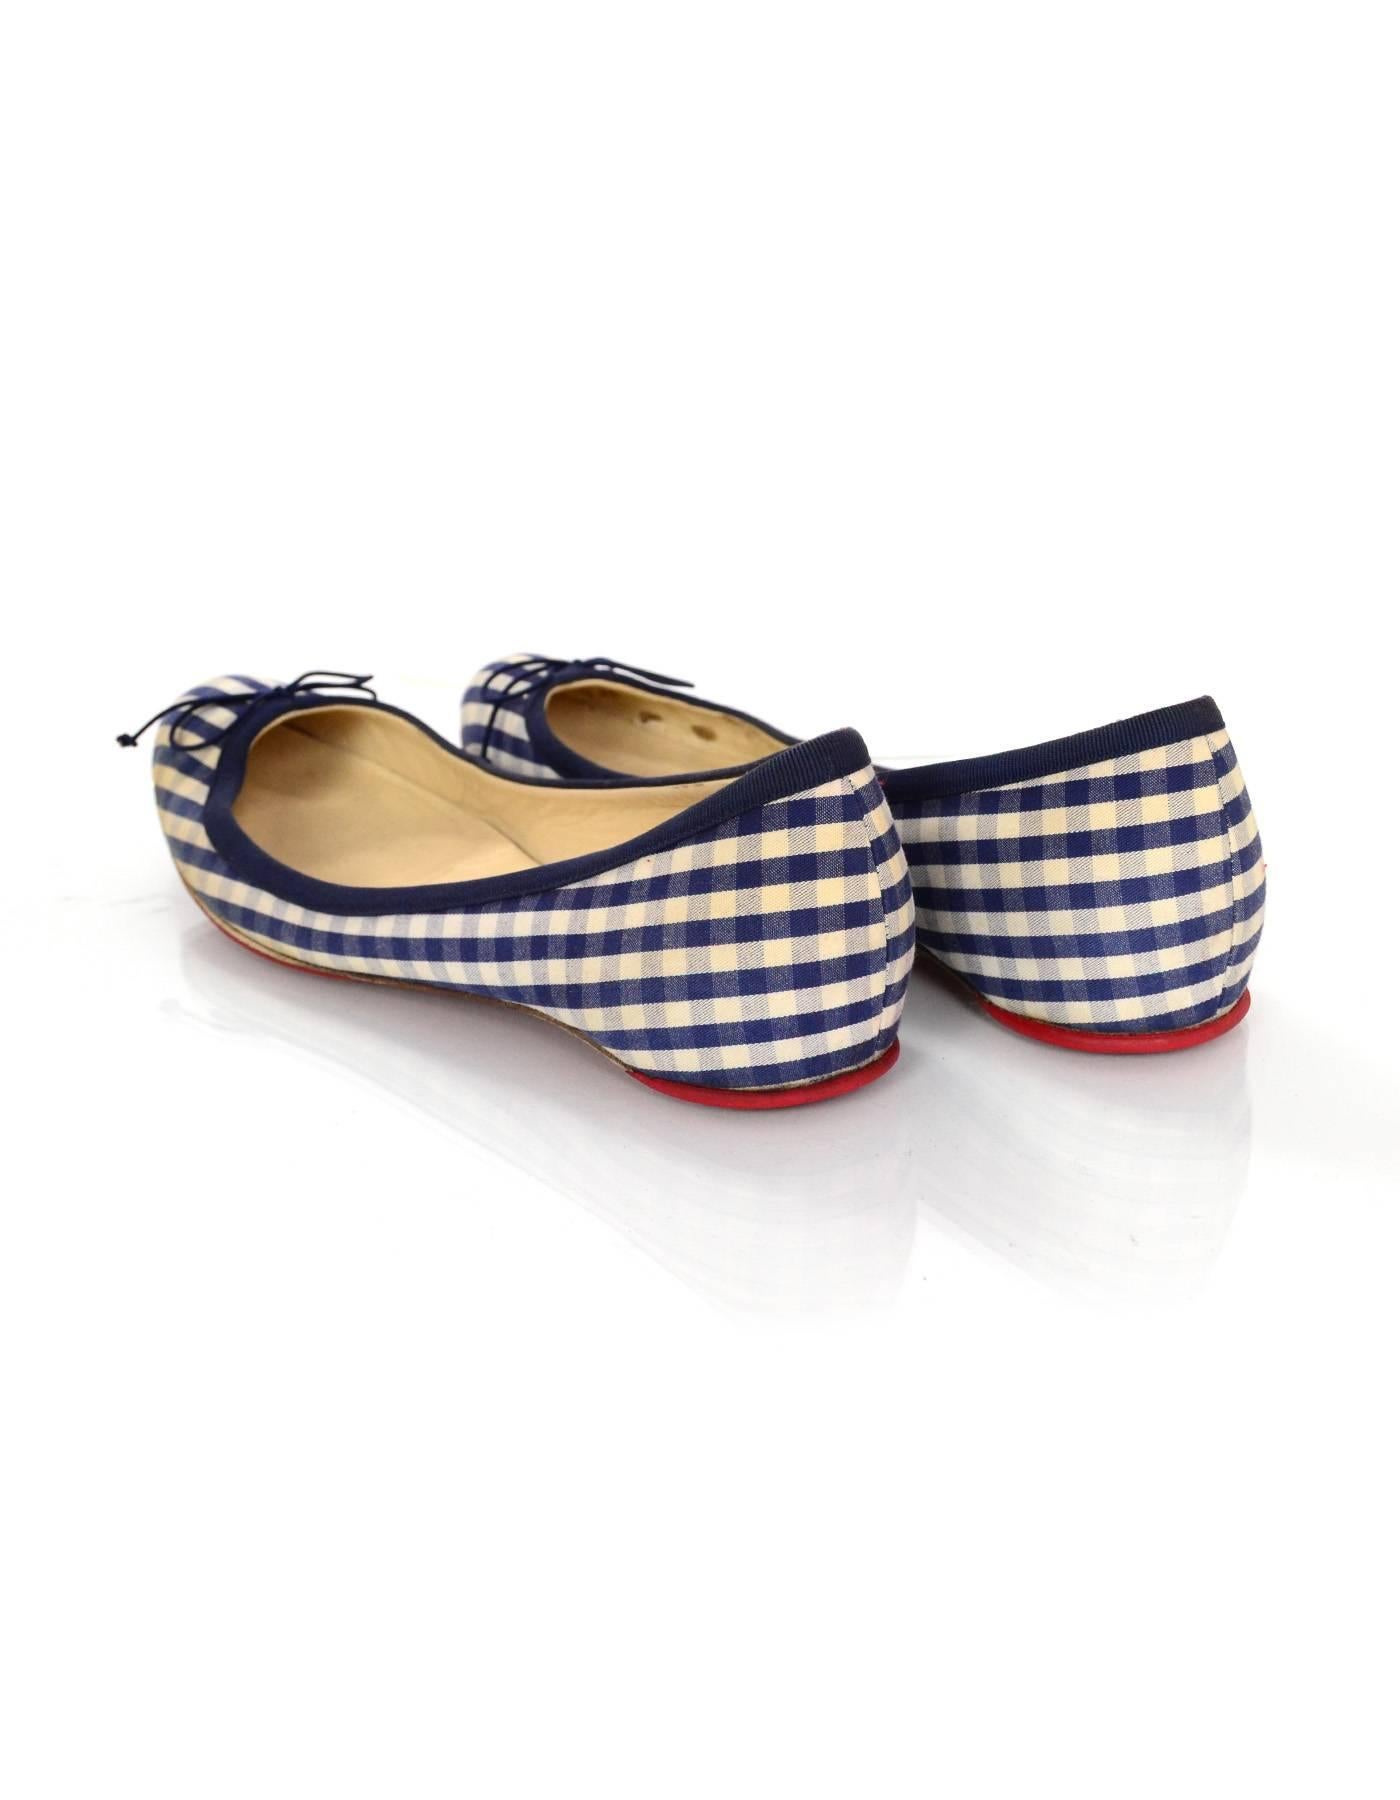 Christian Louboutin Blue & White Gingham Flats Sz 37 In Excellent Condition In New York, NY